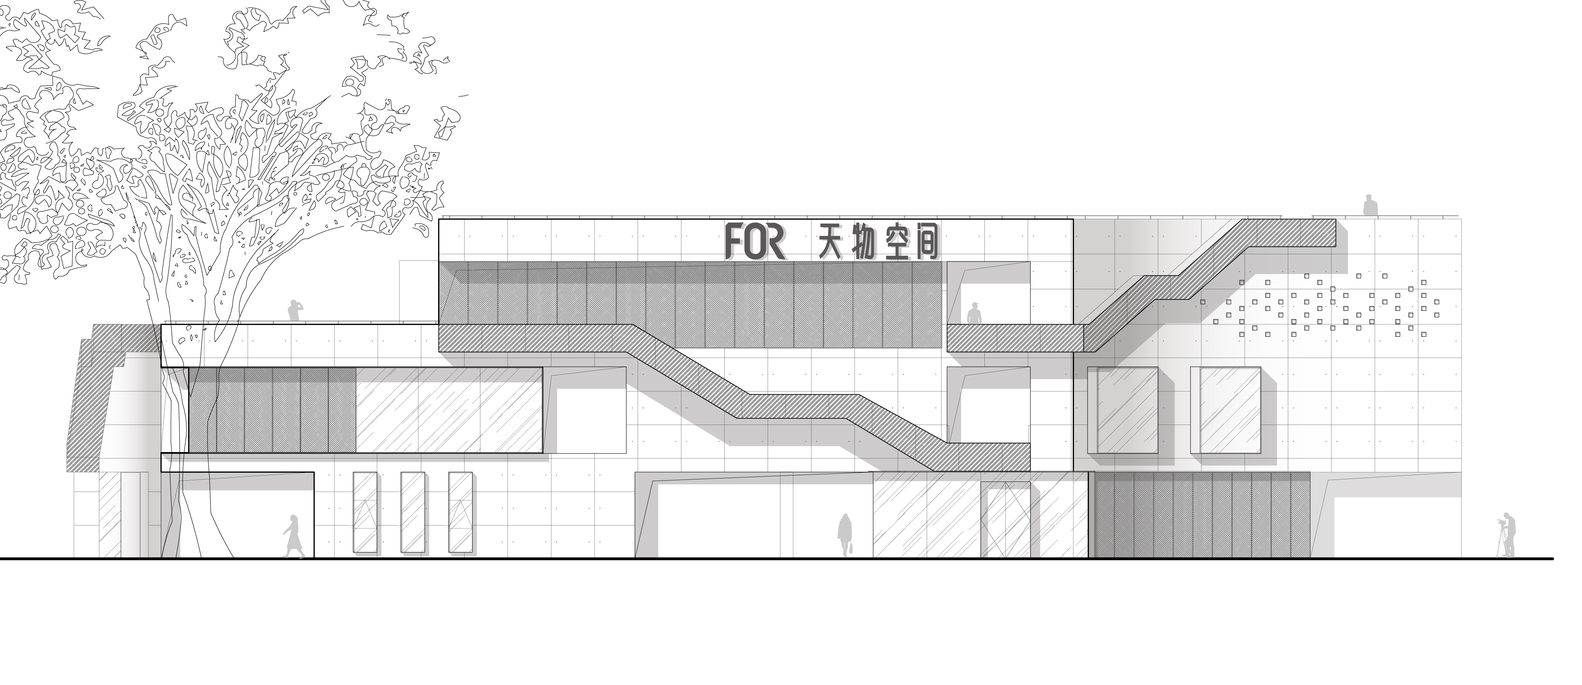 For-C主楼正立面，the_front_facade_of_the_main_building.jpg